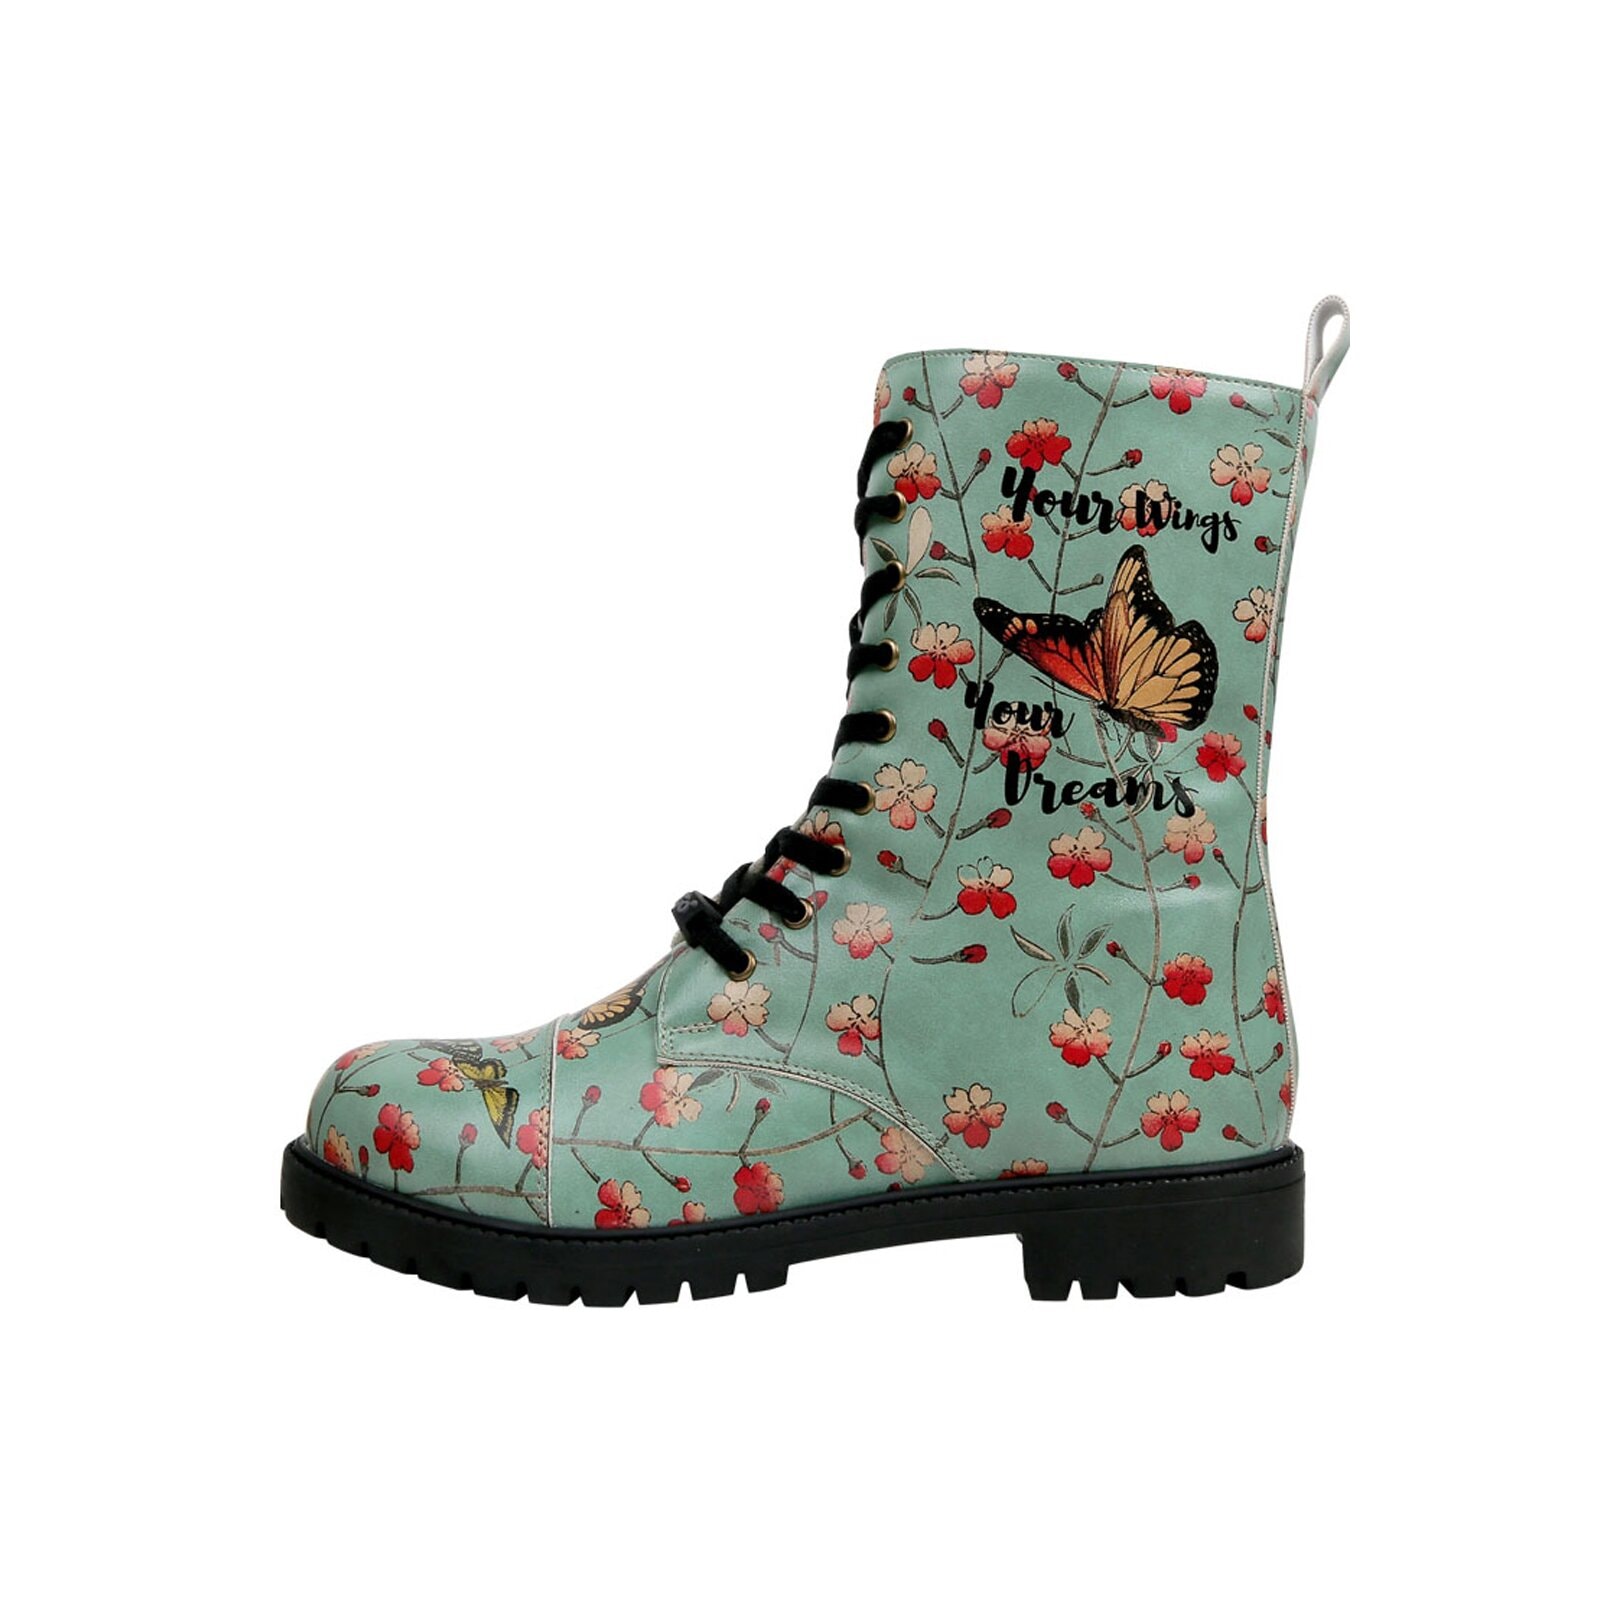 DOGO Schnürboots »Your Wings, Your Dreams«, Vegan